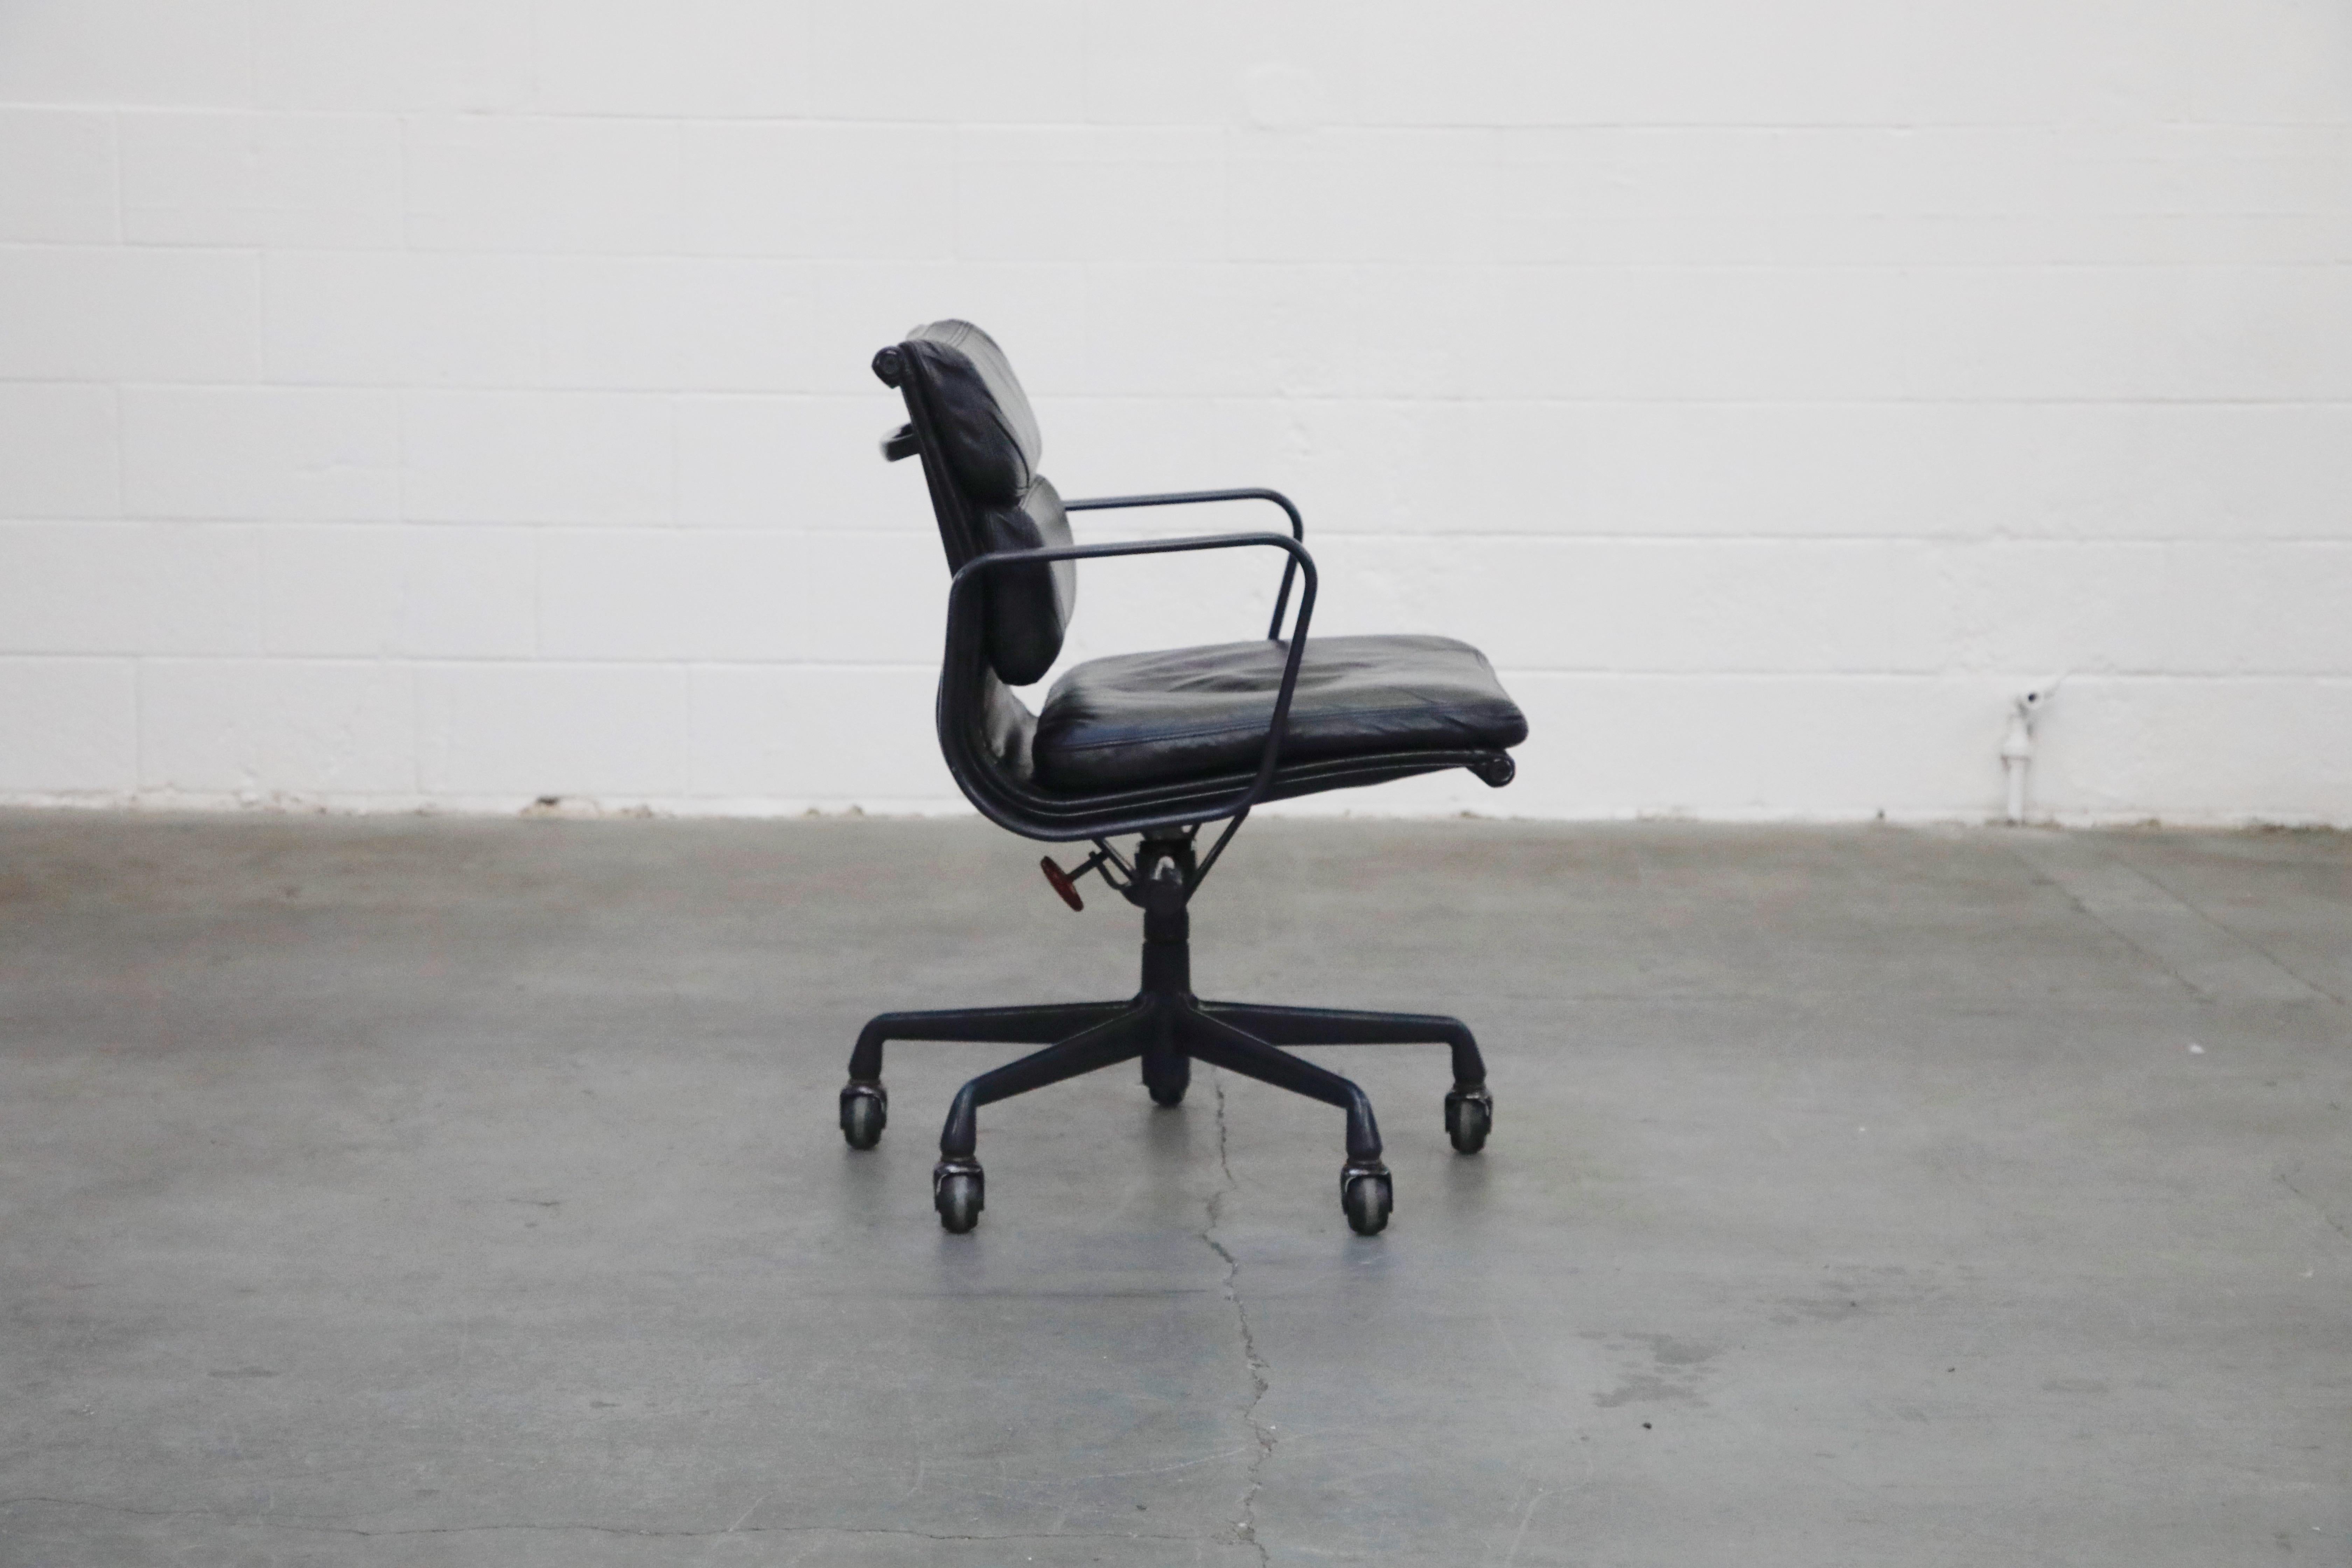 Powder-Coated Black on Black Eames Soft Pad Management Chair by Eames for Herman Miller, 1992